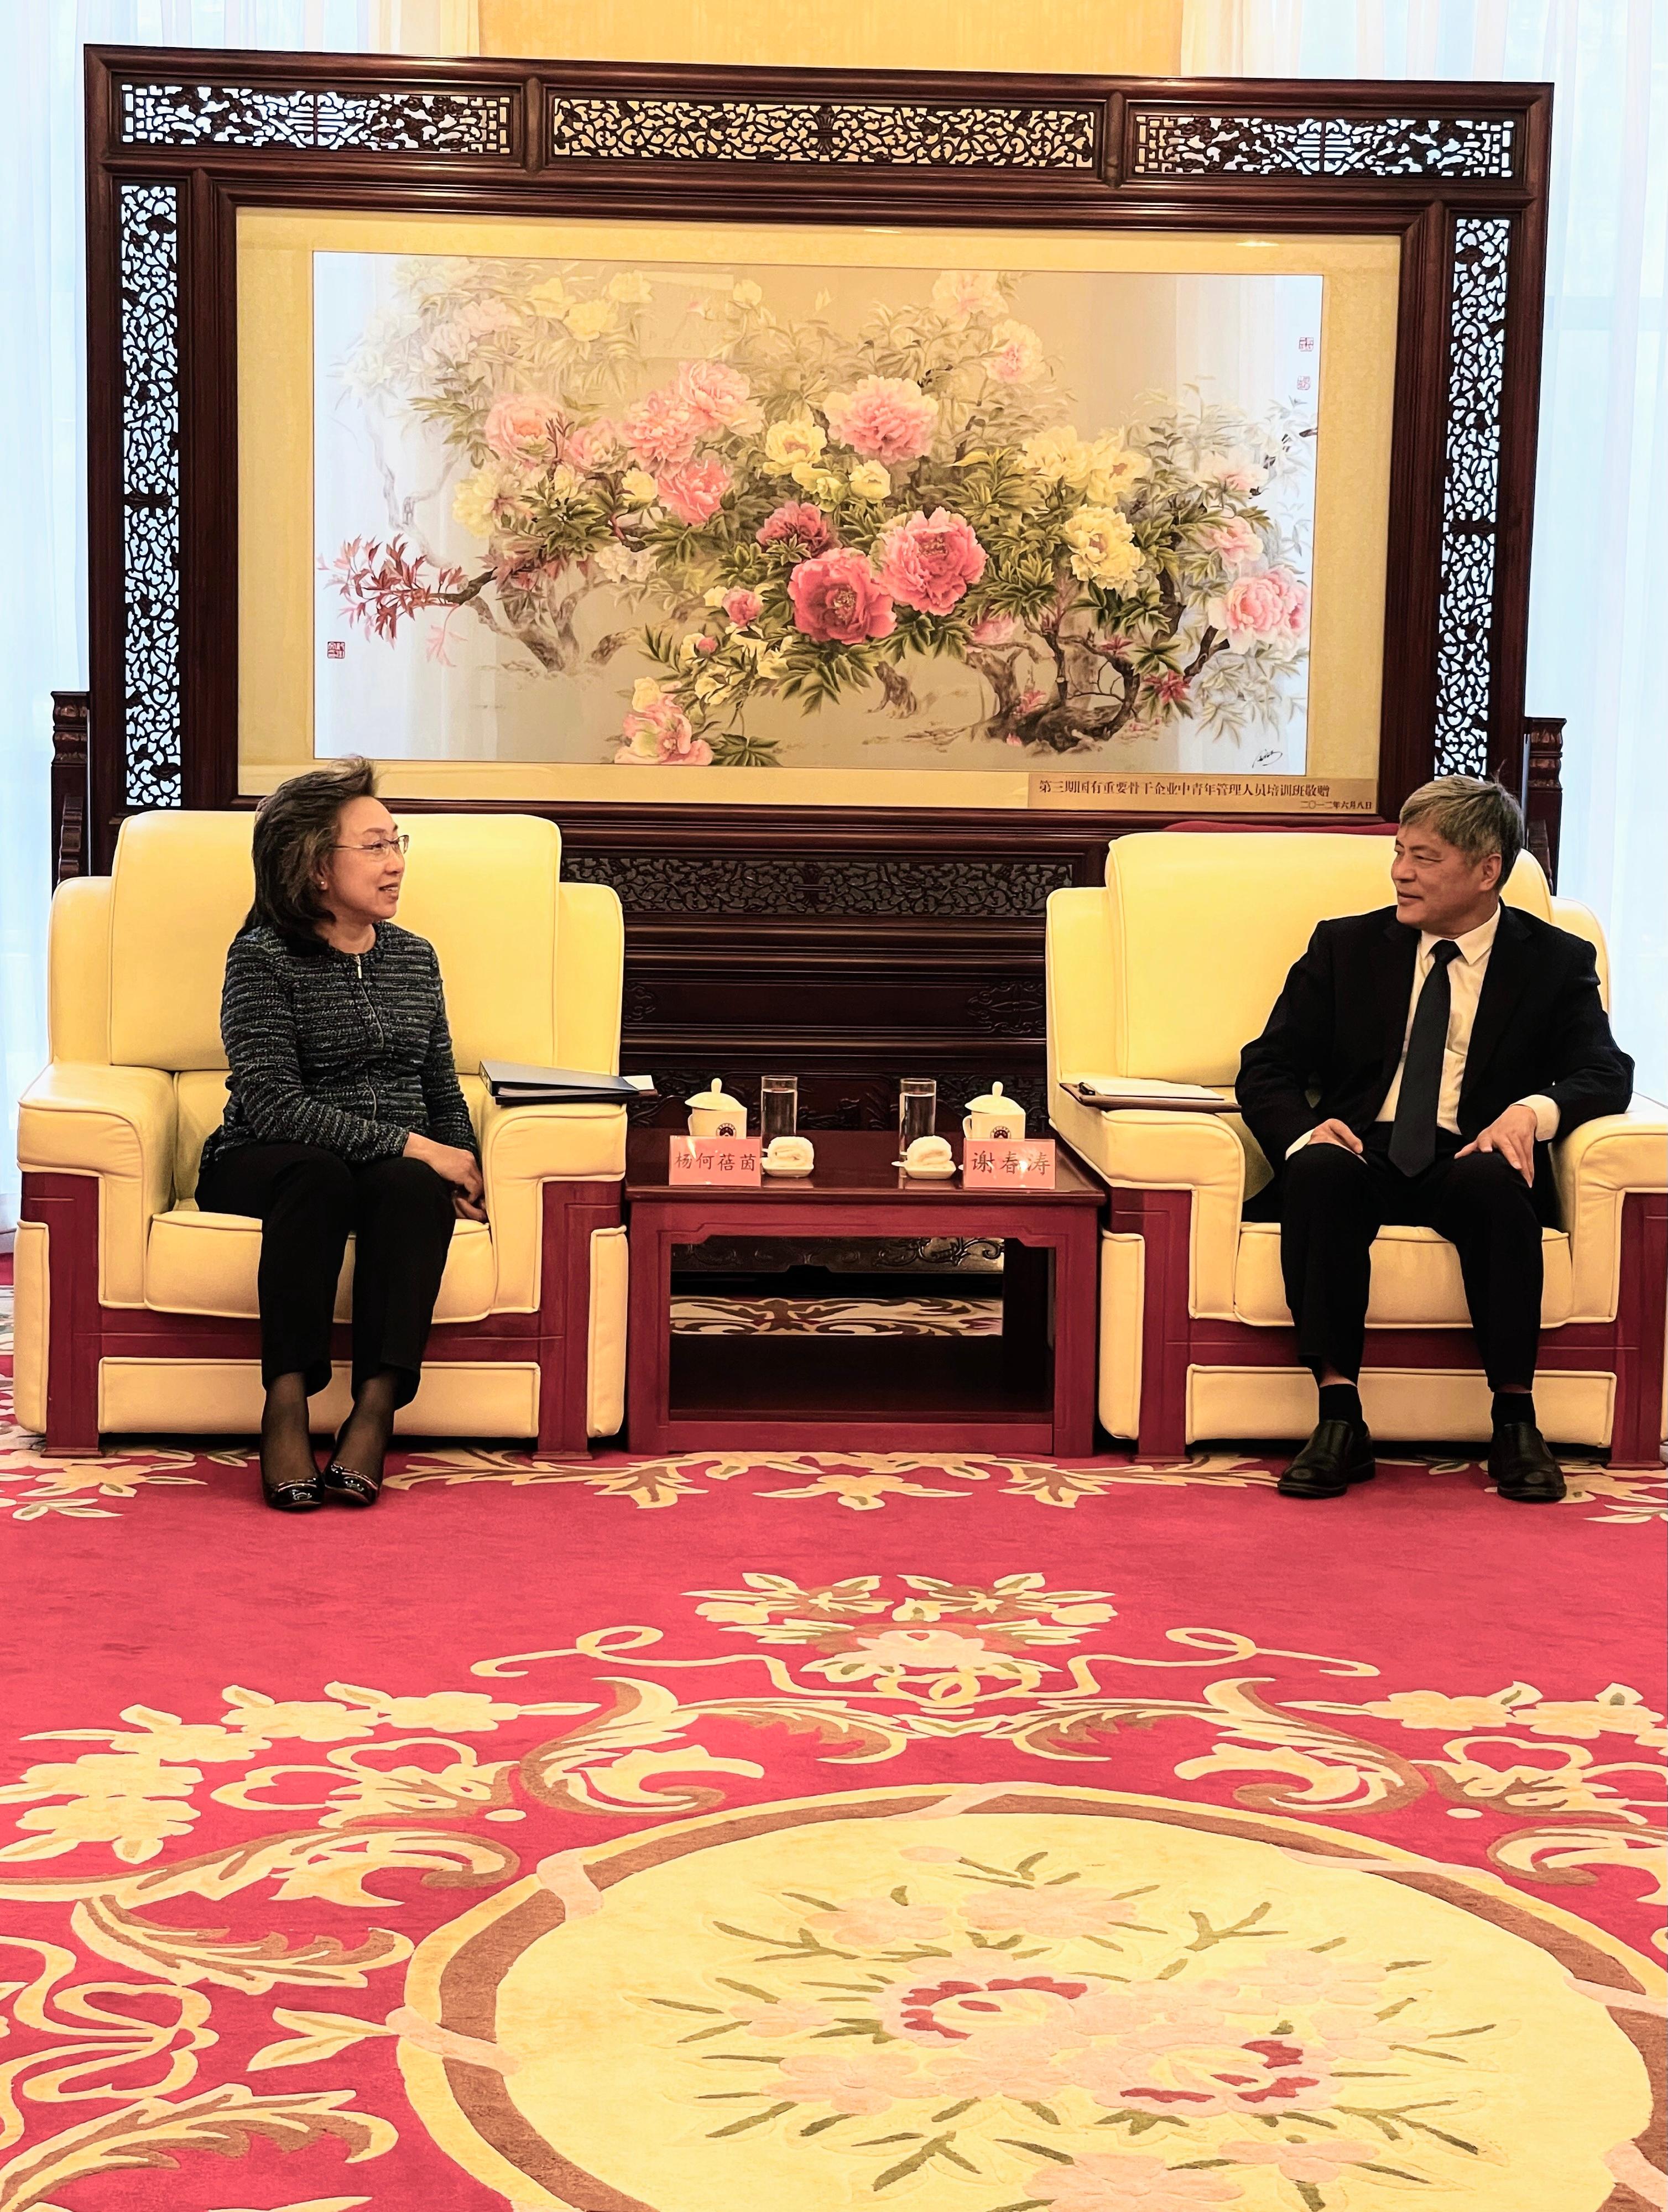 The Secretary for the Civil Service, Mrs Ingrid Yeung, continued her visit in Beijing today (April 27) and called on the National Academy of Governance (NAG) in the morning. Photo shows Mrs Yeung (left) calling on the Executive Vice President of the NAG, Mr Xie Chuntao (right) to introduce the Hong Kong Special Administrative Region Government’s plan to resume its national studies training programmes for civil servants after the epidemic and exchange views.

